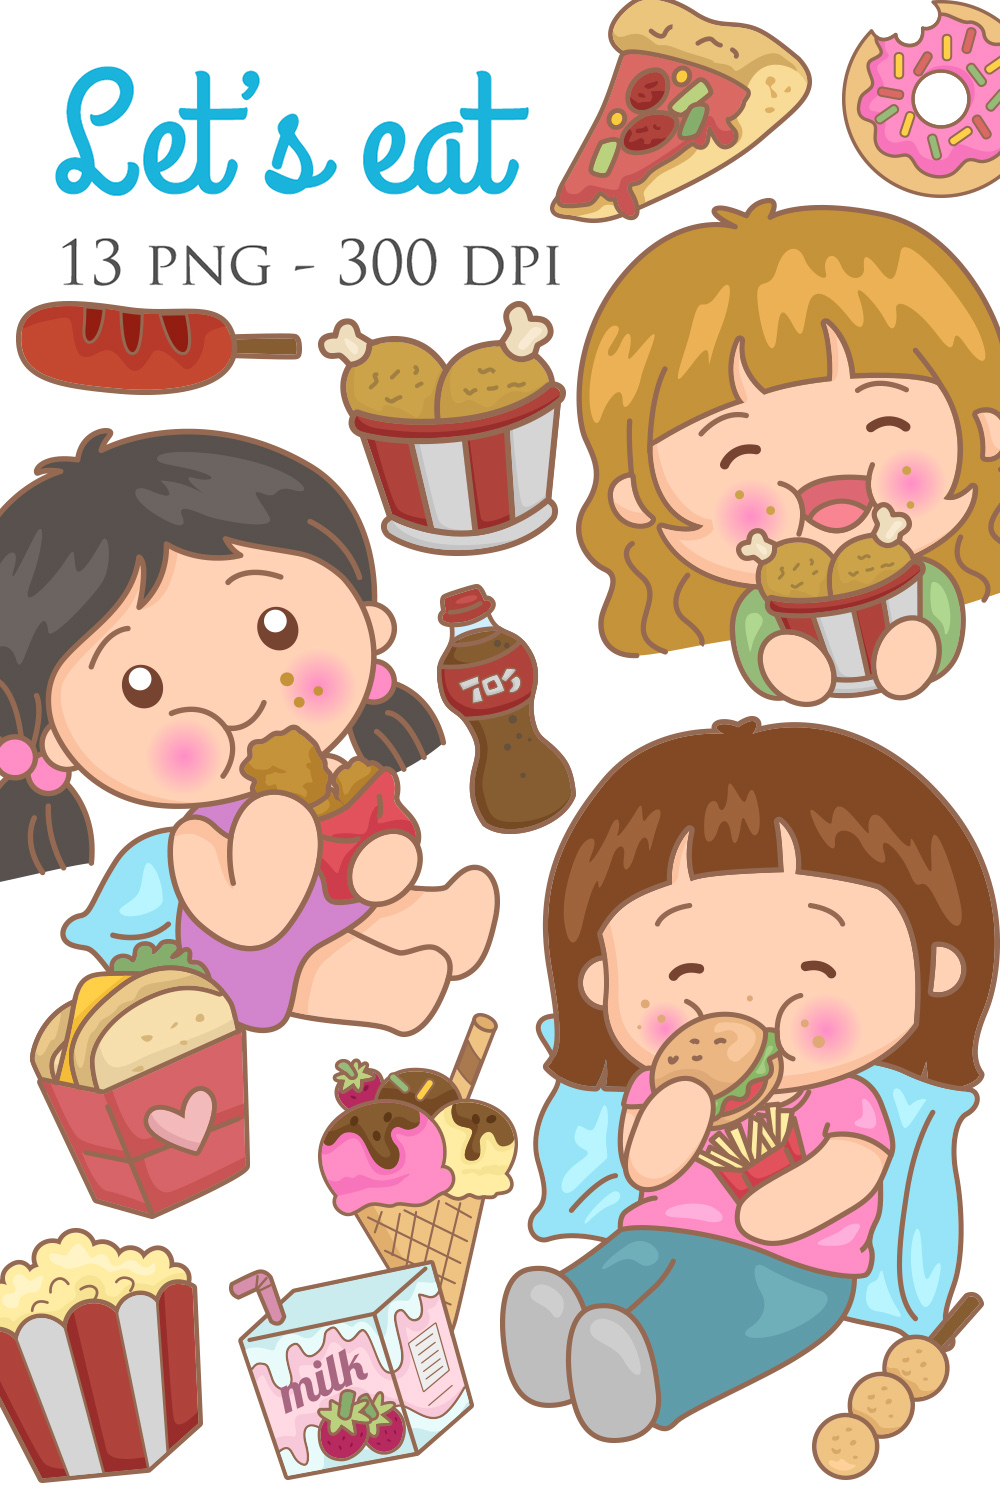 Cute and Funny Little Girl Kids Love and Like To Eat Food and Junk Food Drink Feel Happy Ice Cream Popcorn Pizza Sandwich Donut Milk Fried Chicken Cola Illustration Cartoon Clipart Vector pinterest preview image.